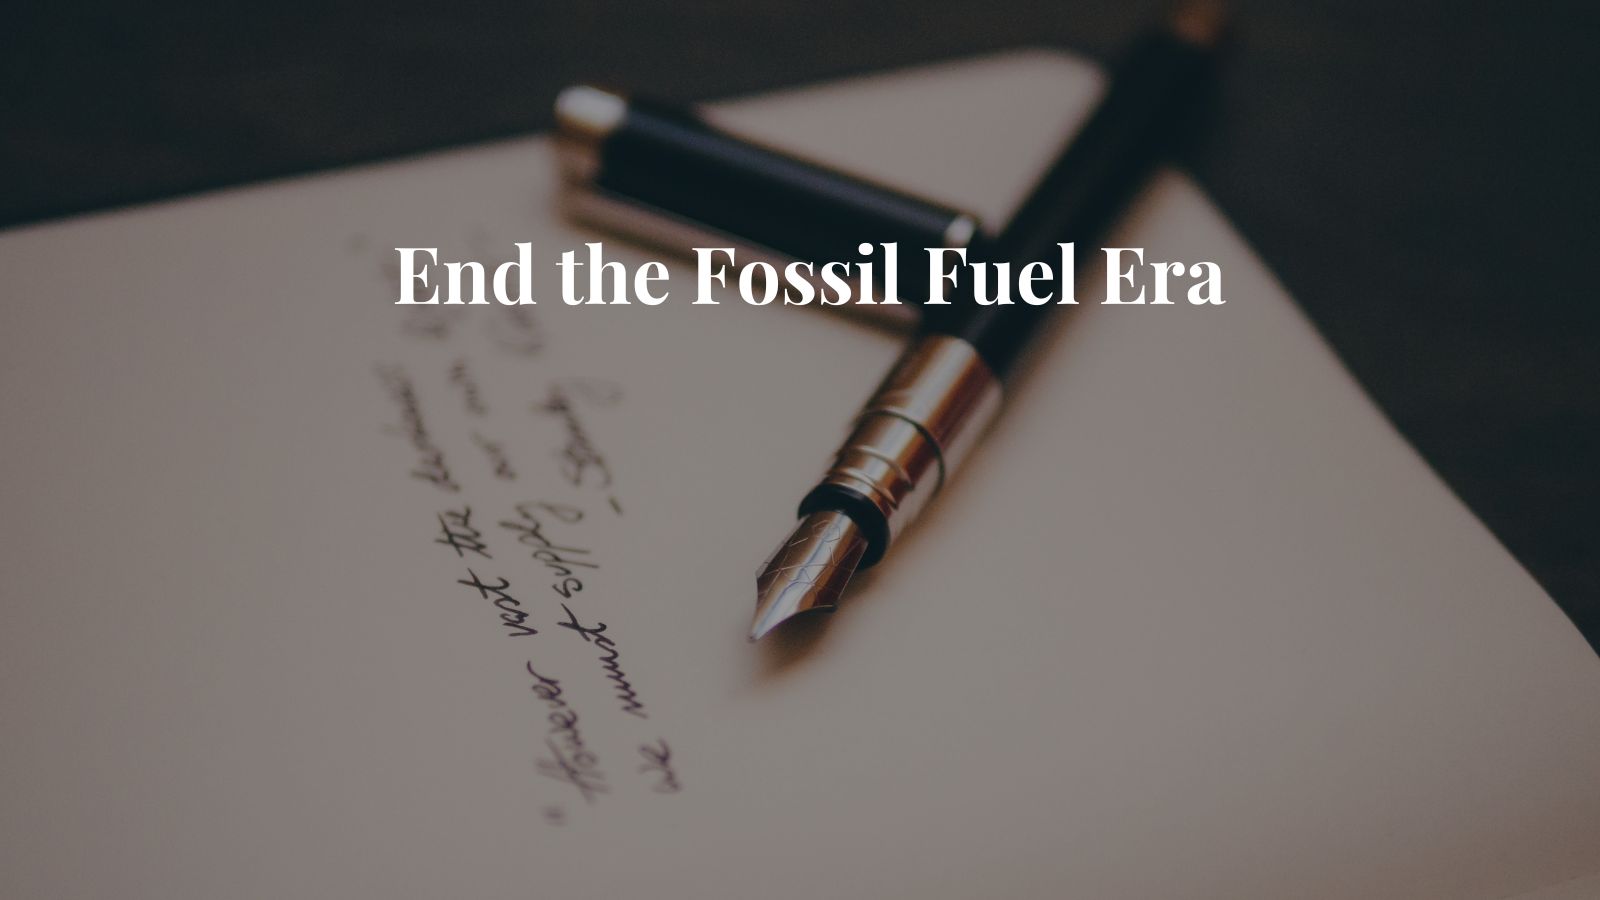 End the Fossil Fuel Era, Say Government Officials